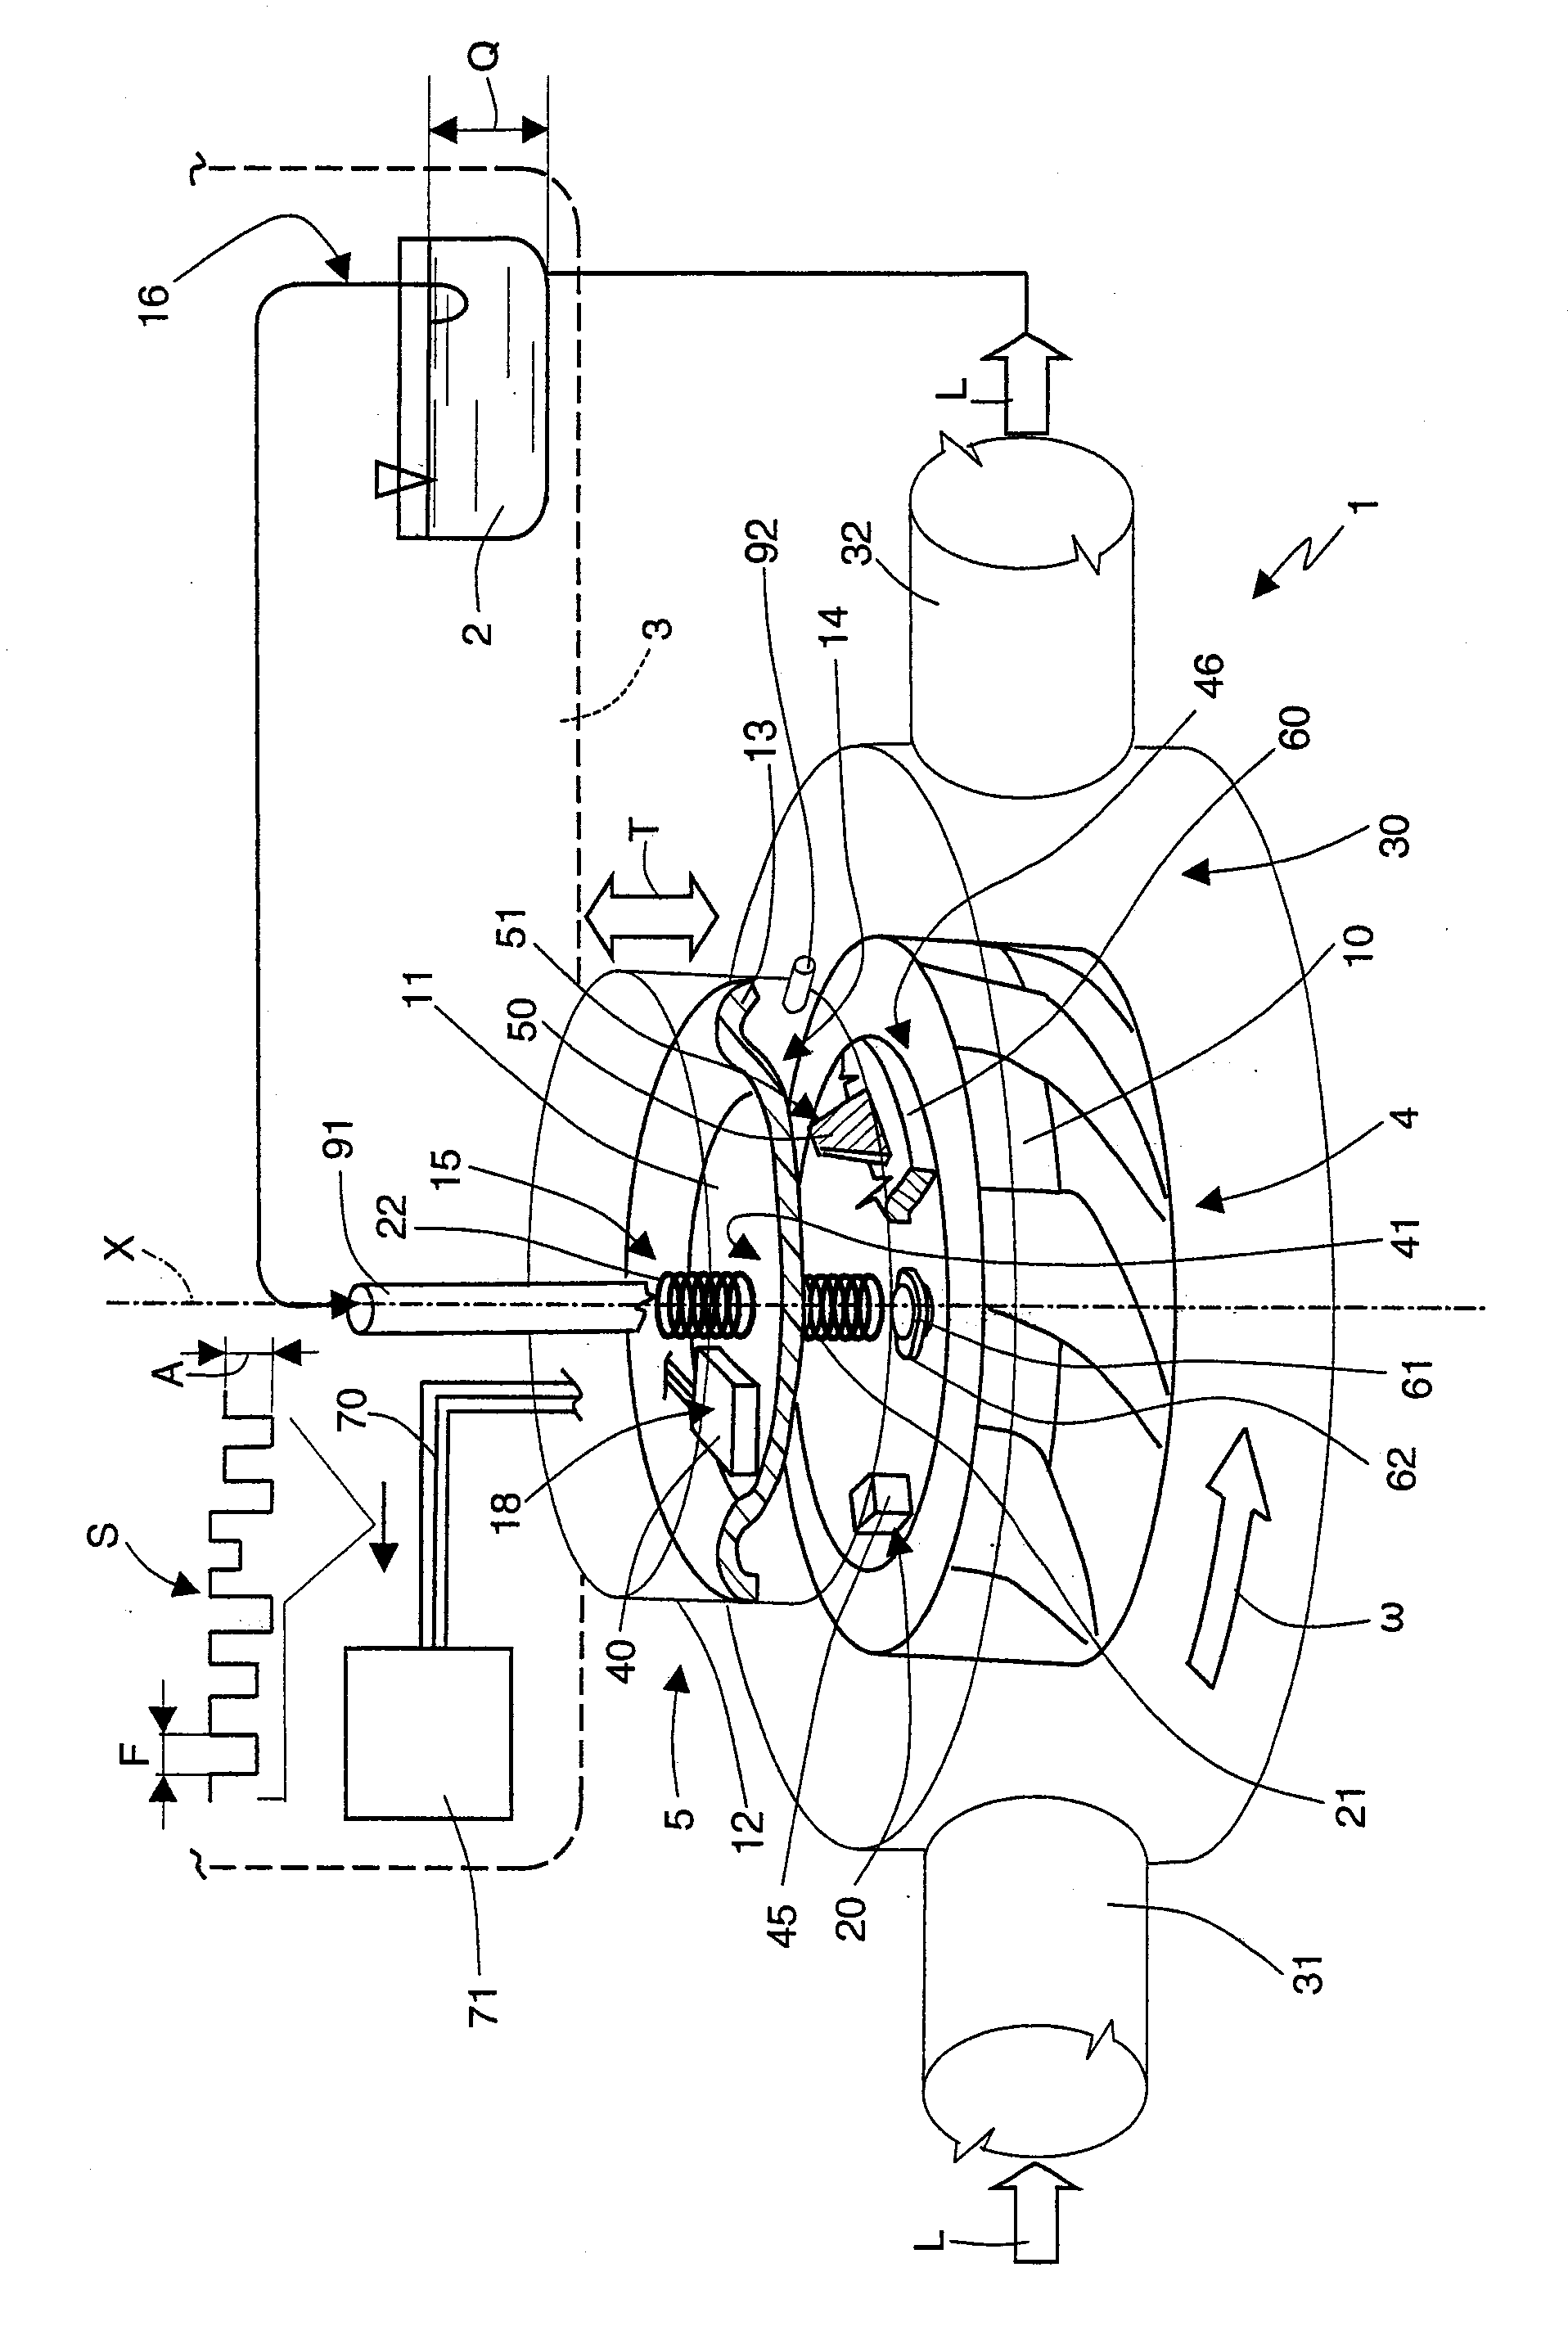 Monitoring device of the feed to an electric household appliance of an operative fluid, in particular of a flow of water to a tank of a washing machine or dishwasher